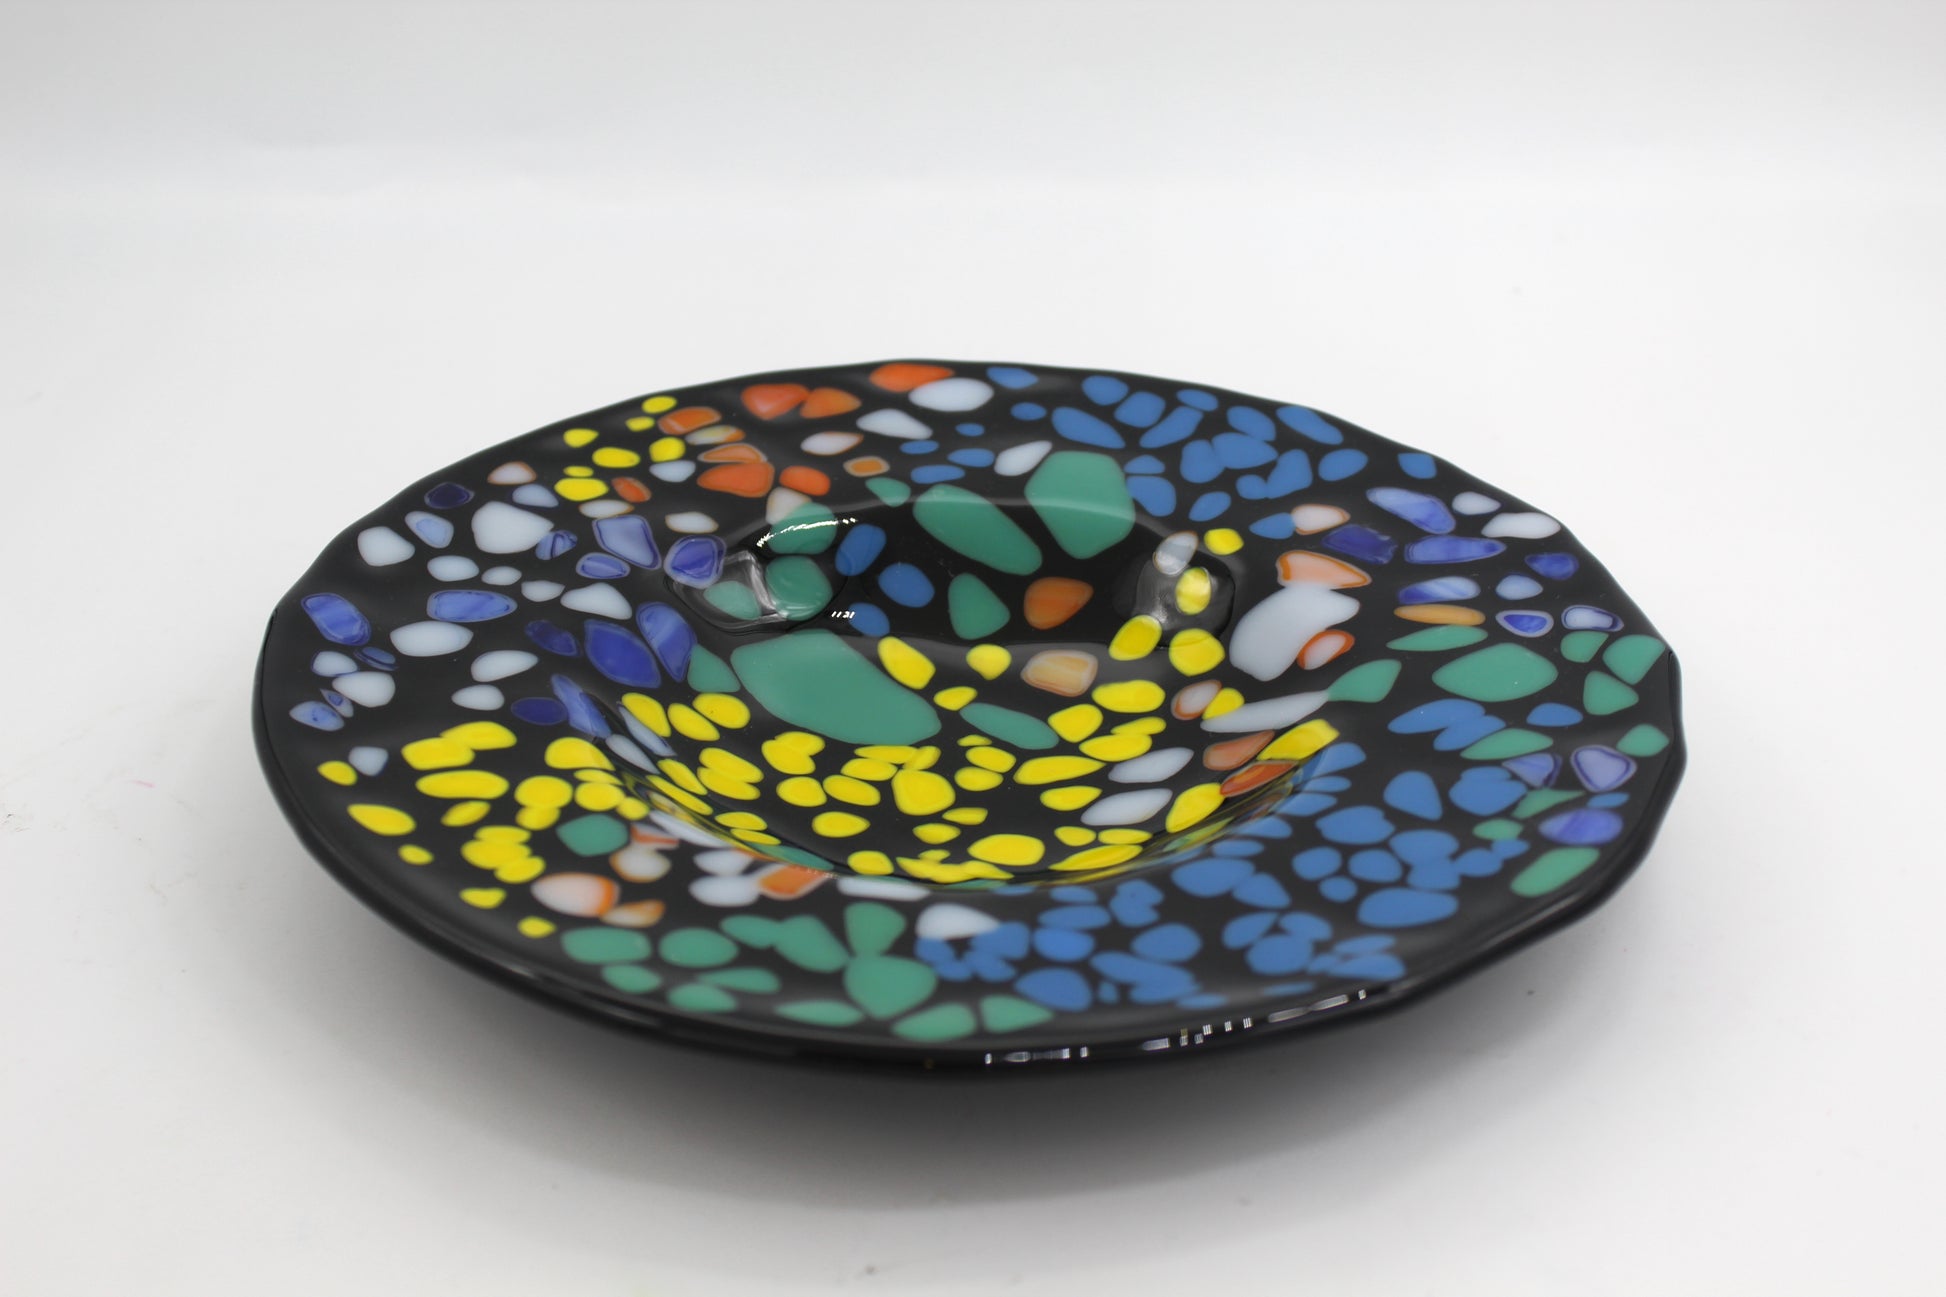 This is a black circular glass art with multicolored splotches including orange, blue, green, white and yellow.